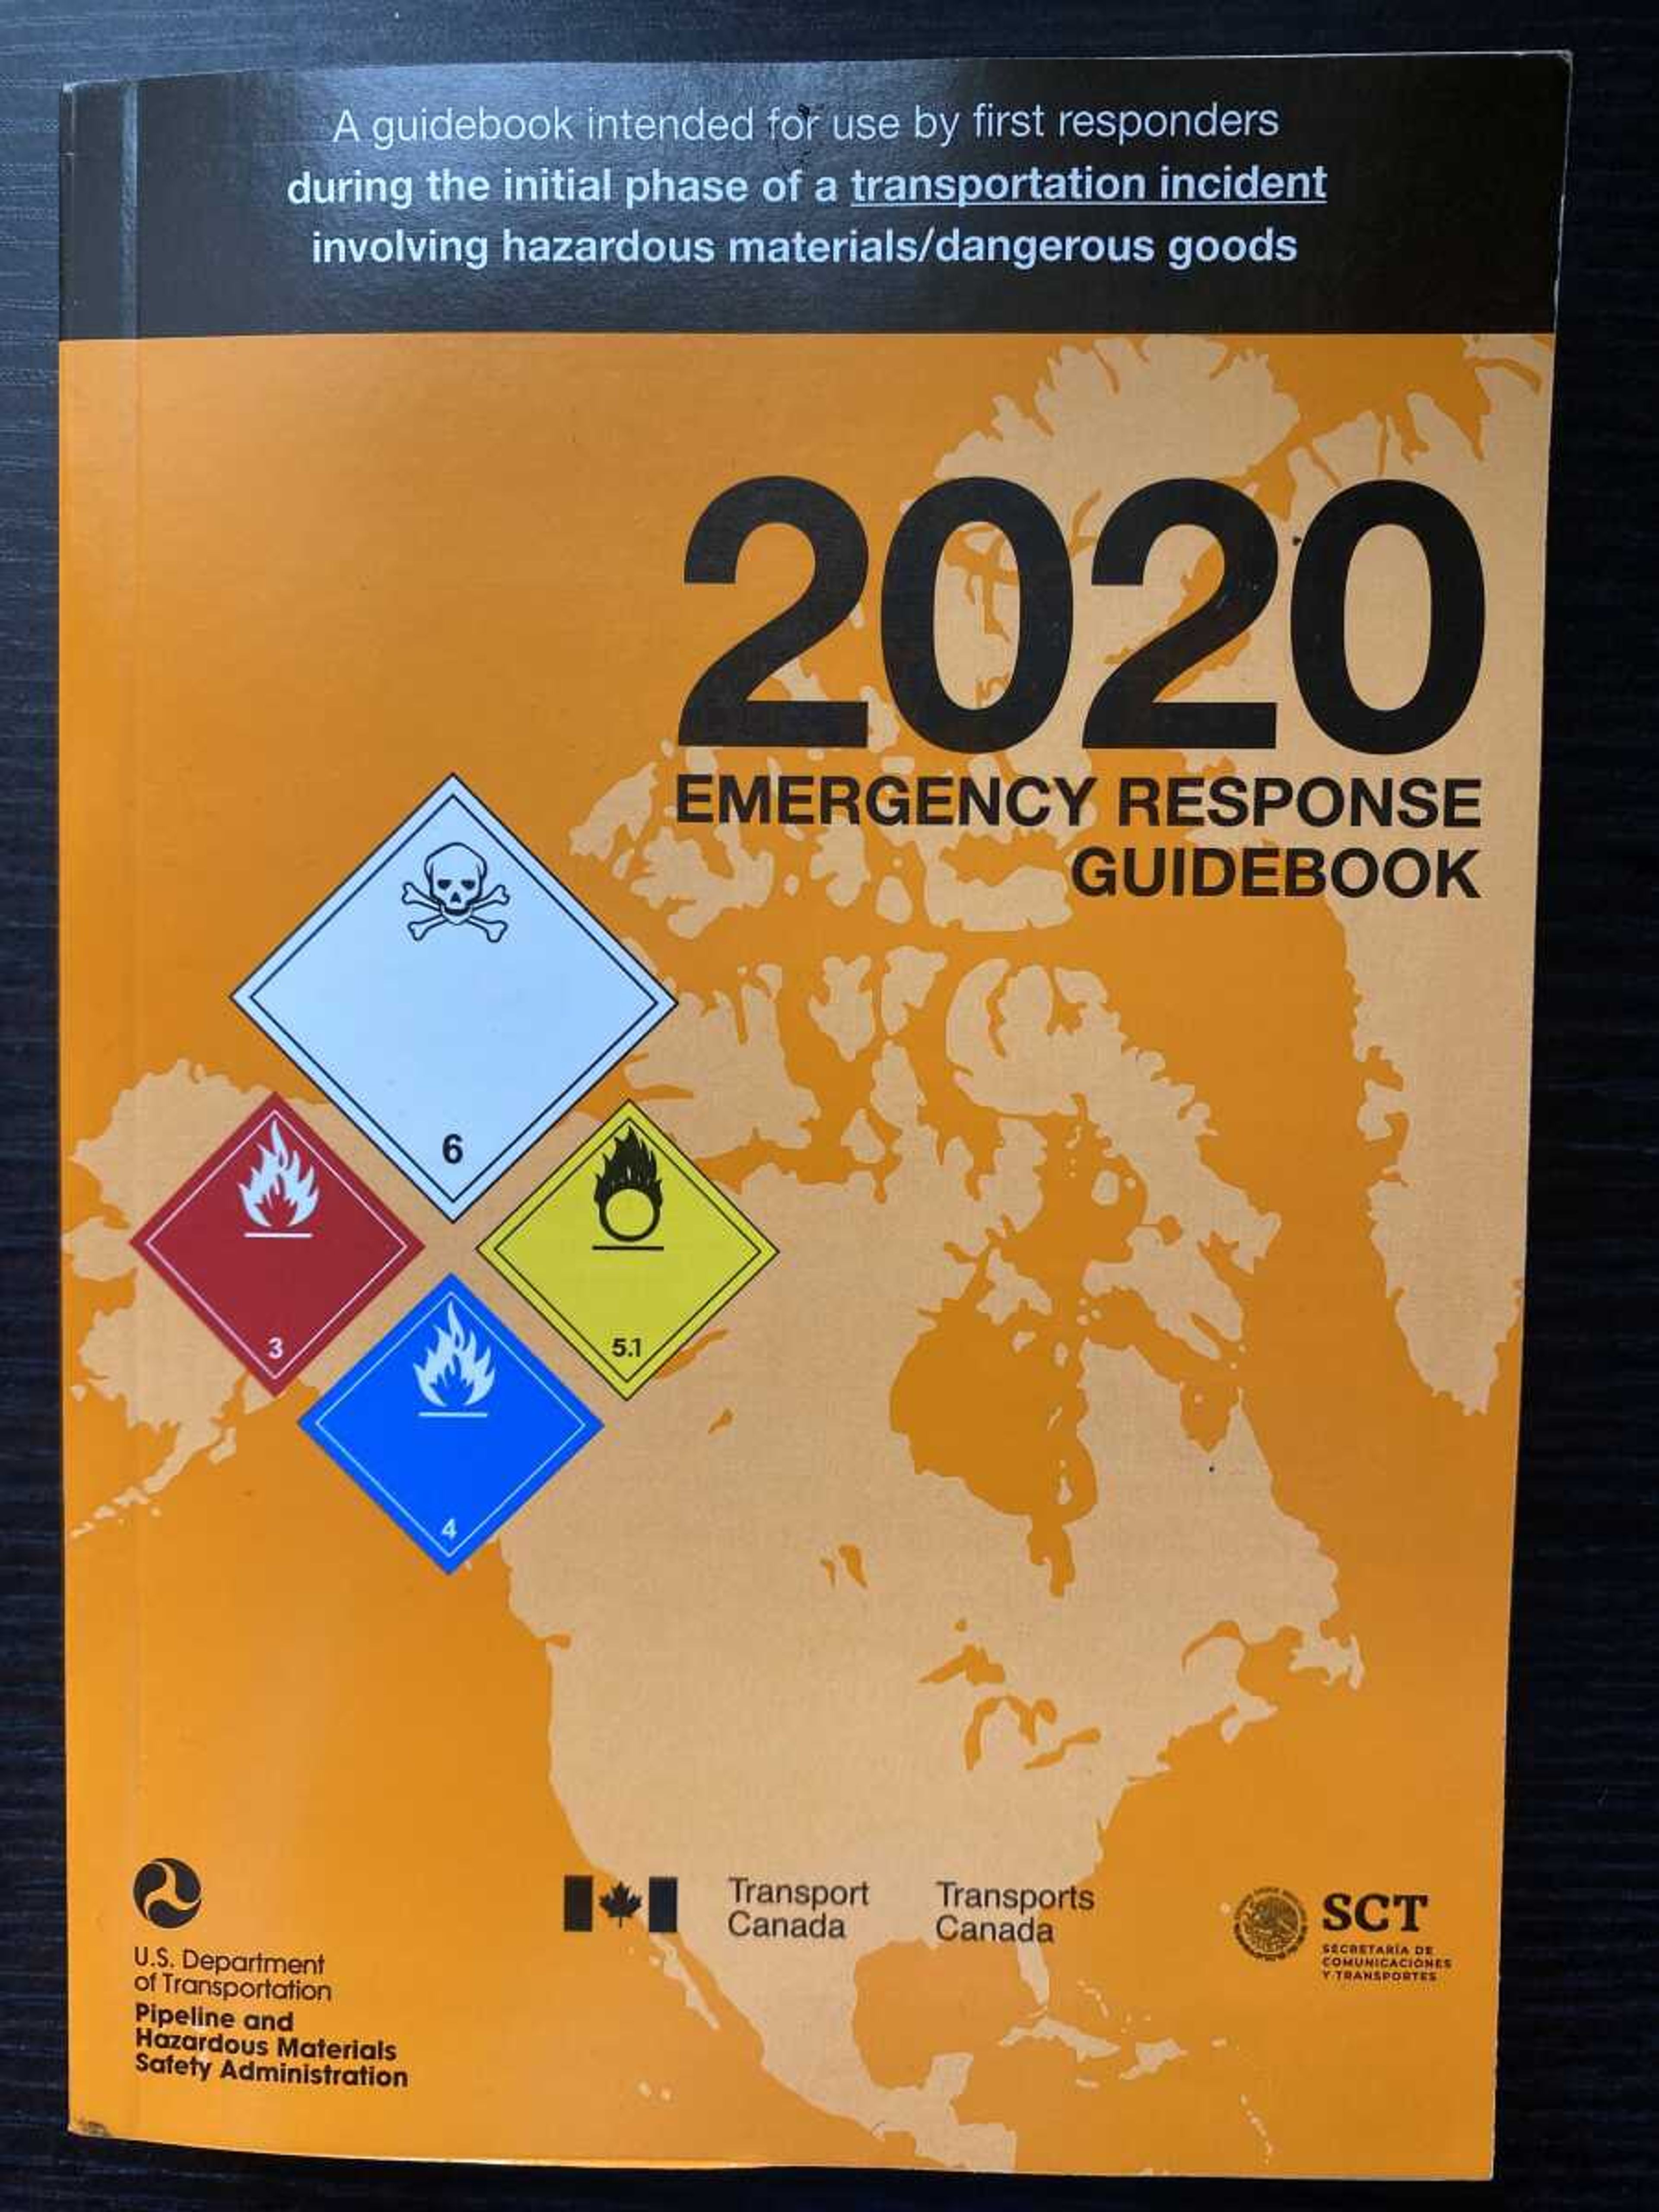 The Emergency Response Guidebook used by Cape Girardeau first responders and emergency planners, which is updated every four years. The guidebook contains information about commonly encountered hazardous materials and chemicals and how to identify them.